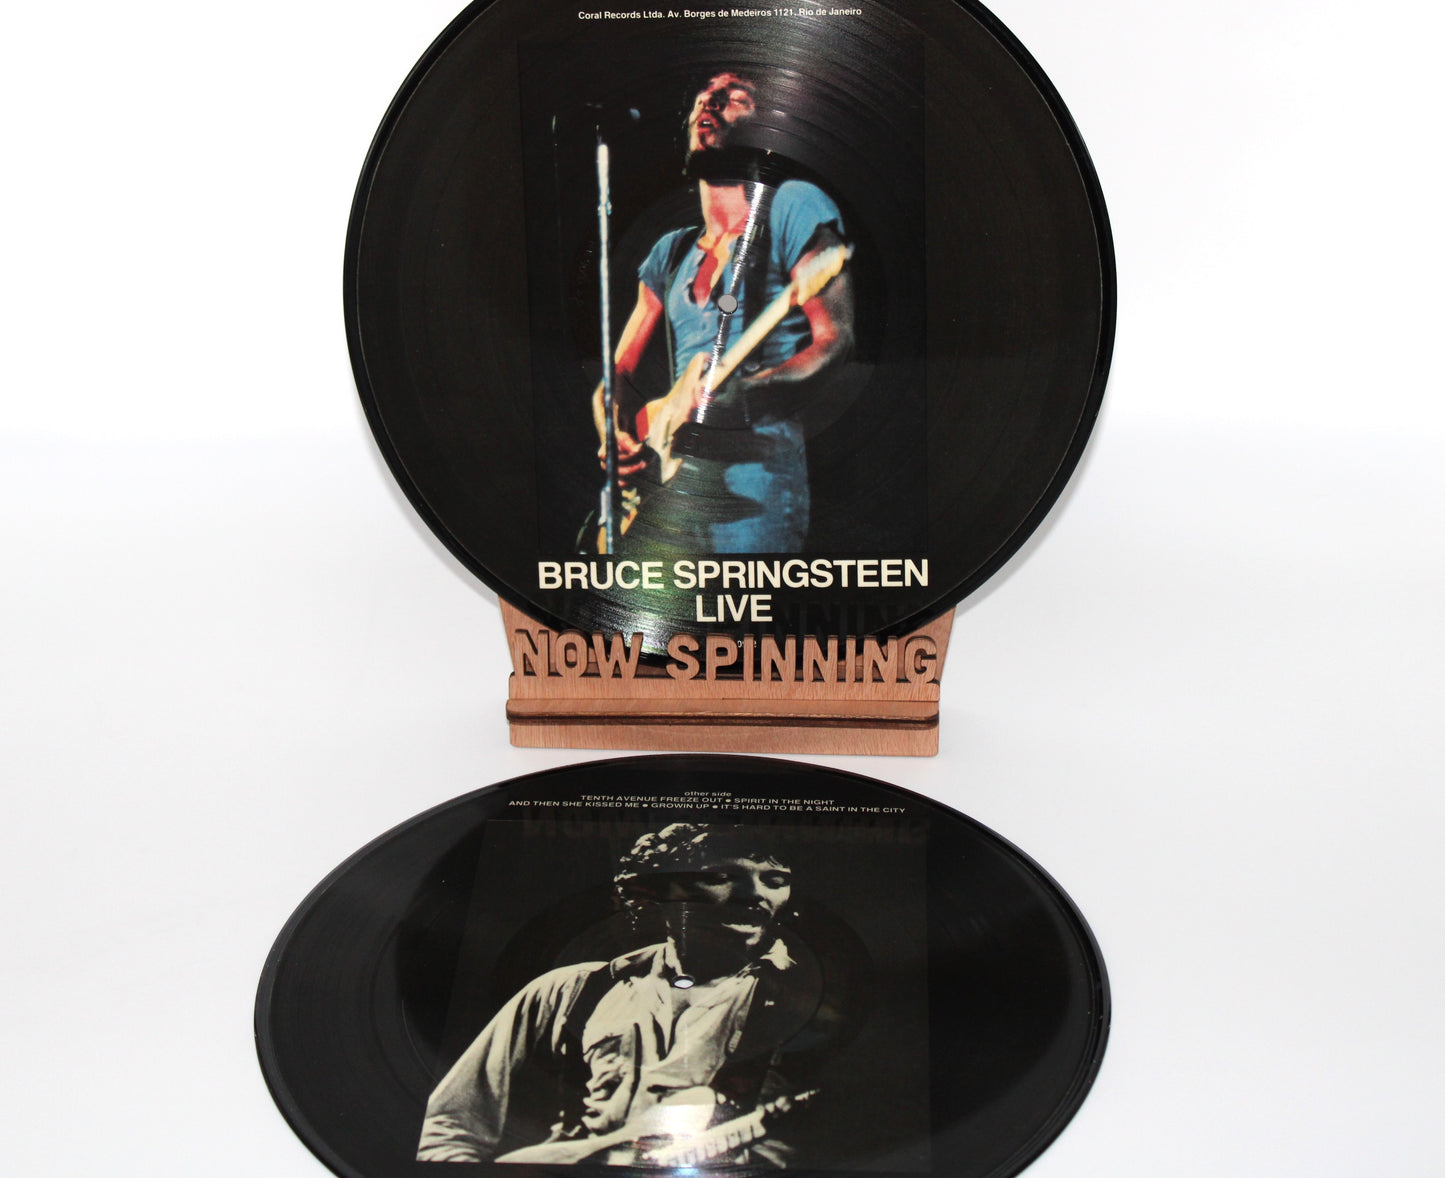 Bruce Springsteen - LIVE Wild and Innocent - Picture Vinyl 2LPs Extremely Rare - BLV